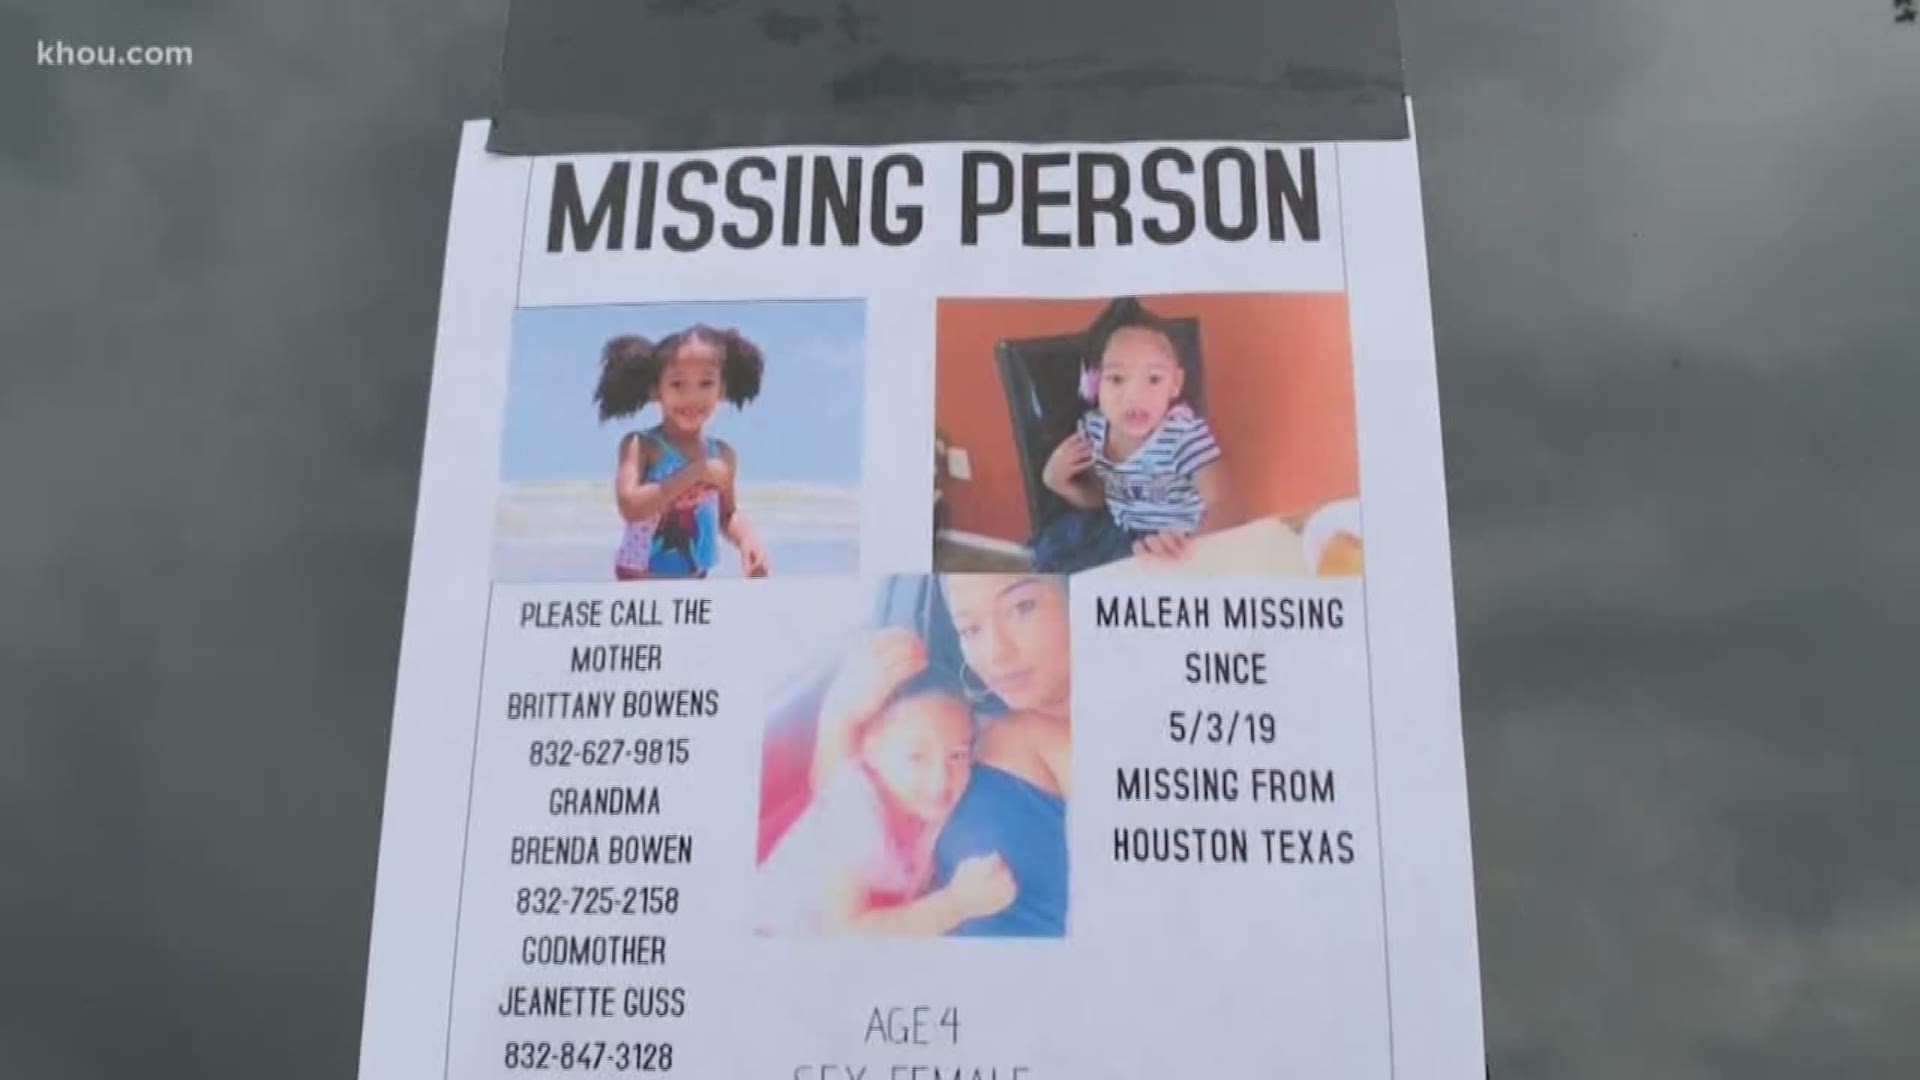 Family and volunteers are passing out flyers in Sugar Land with hopes someone knows something about Maleah Davis' disappearance. Maleah went missing Friday after her stepdad said they were kidnapped by three men. But he and his son were set free.